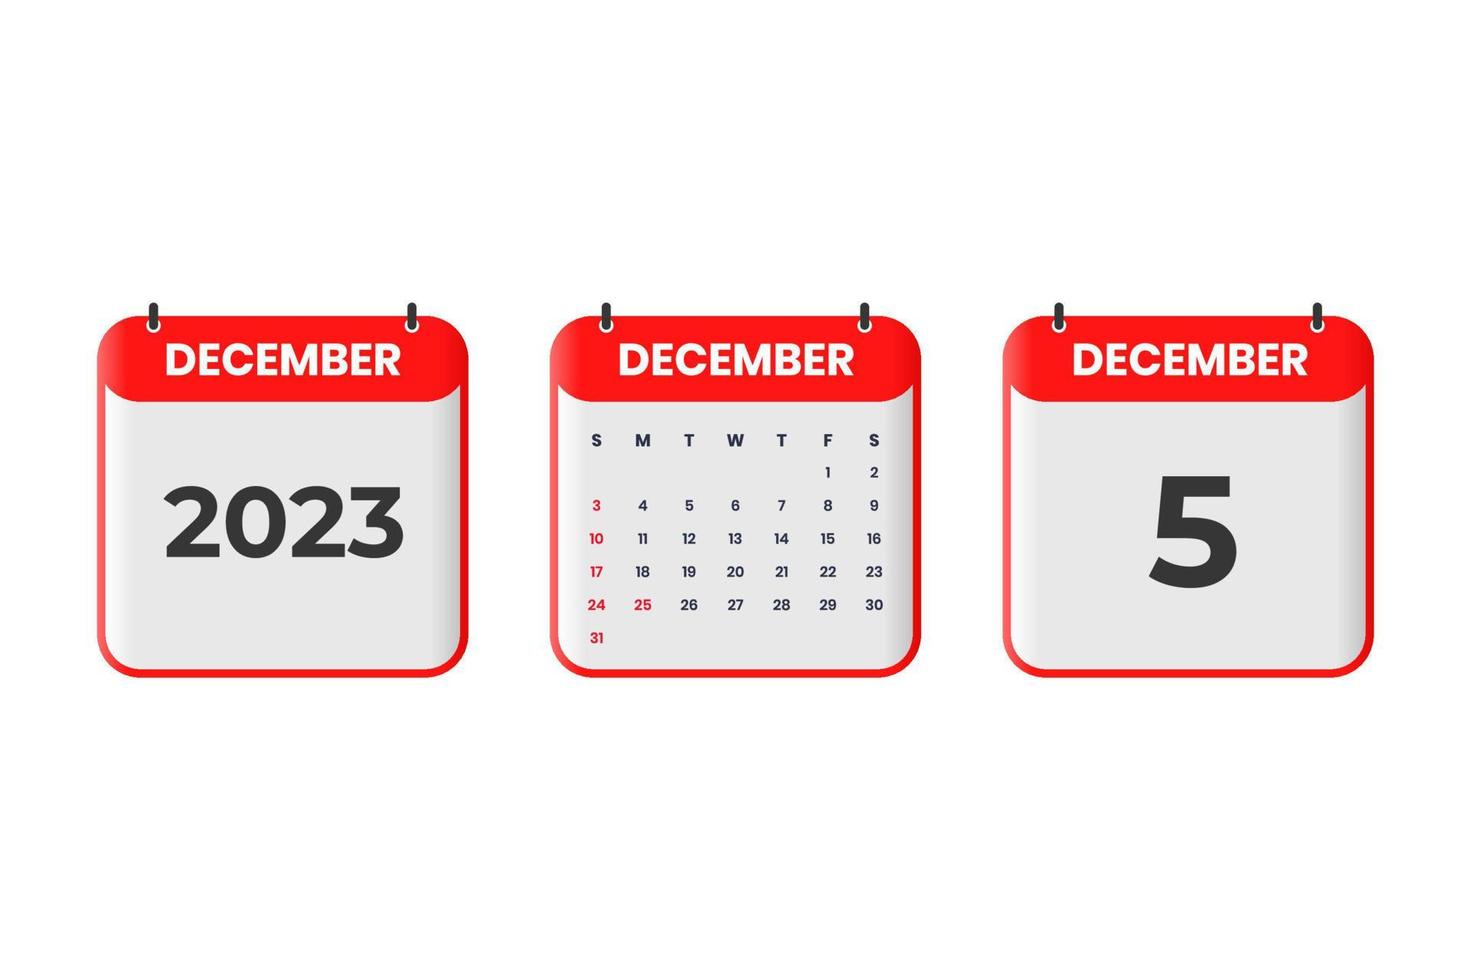 December 2023 calendar design. 5th December 2023 calendar icon for schedule, appointment, important date concept vector